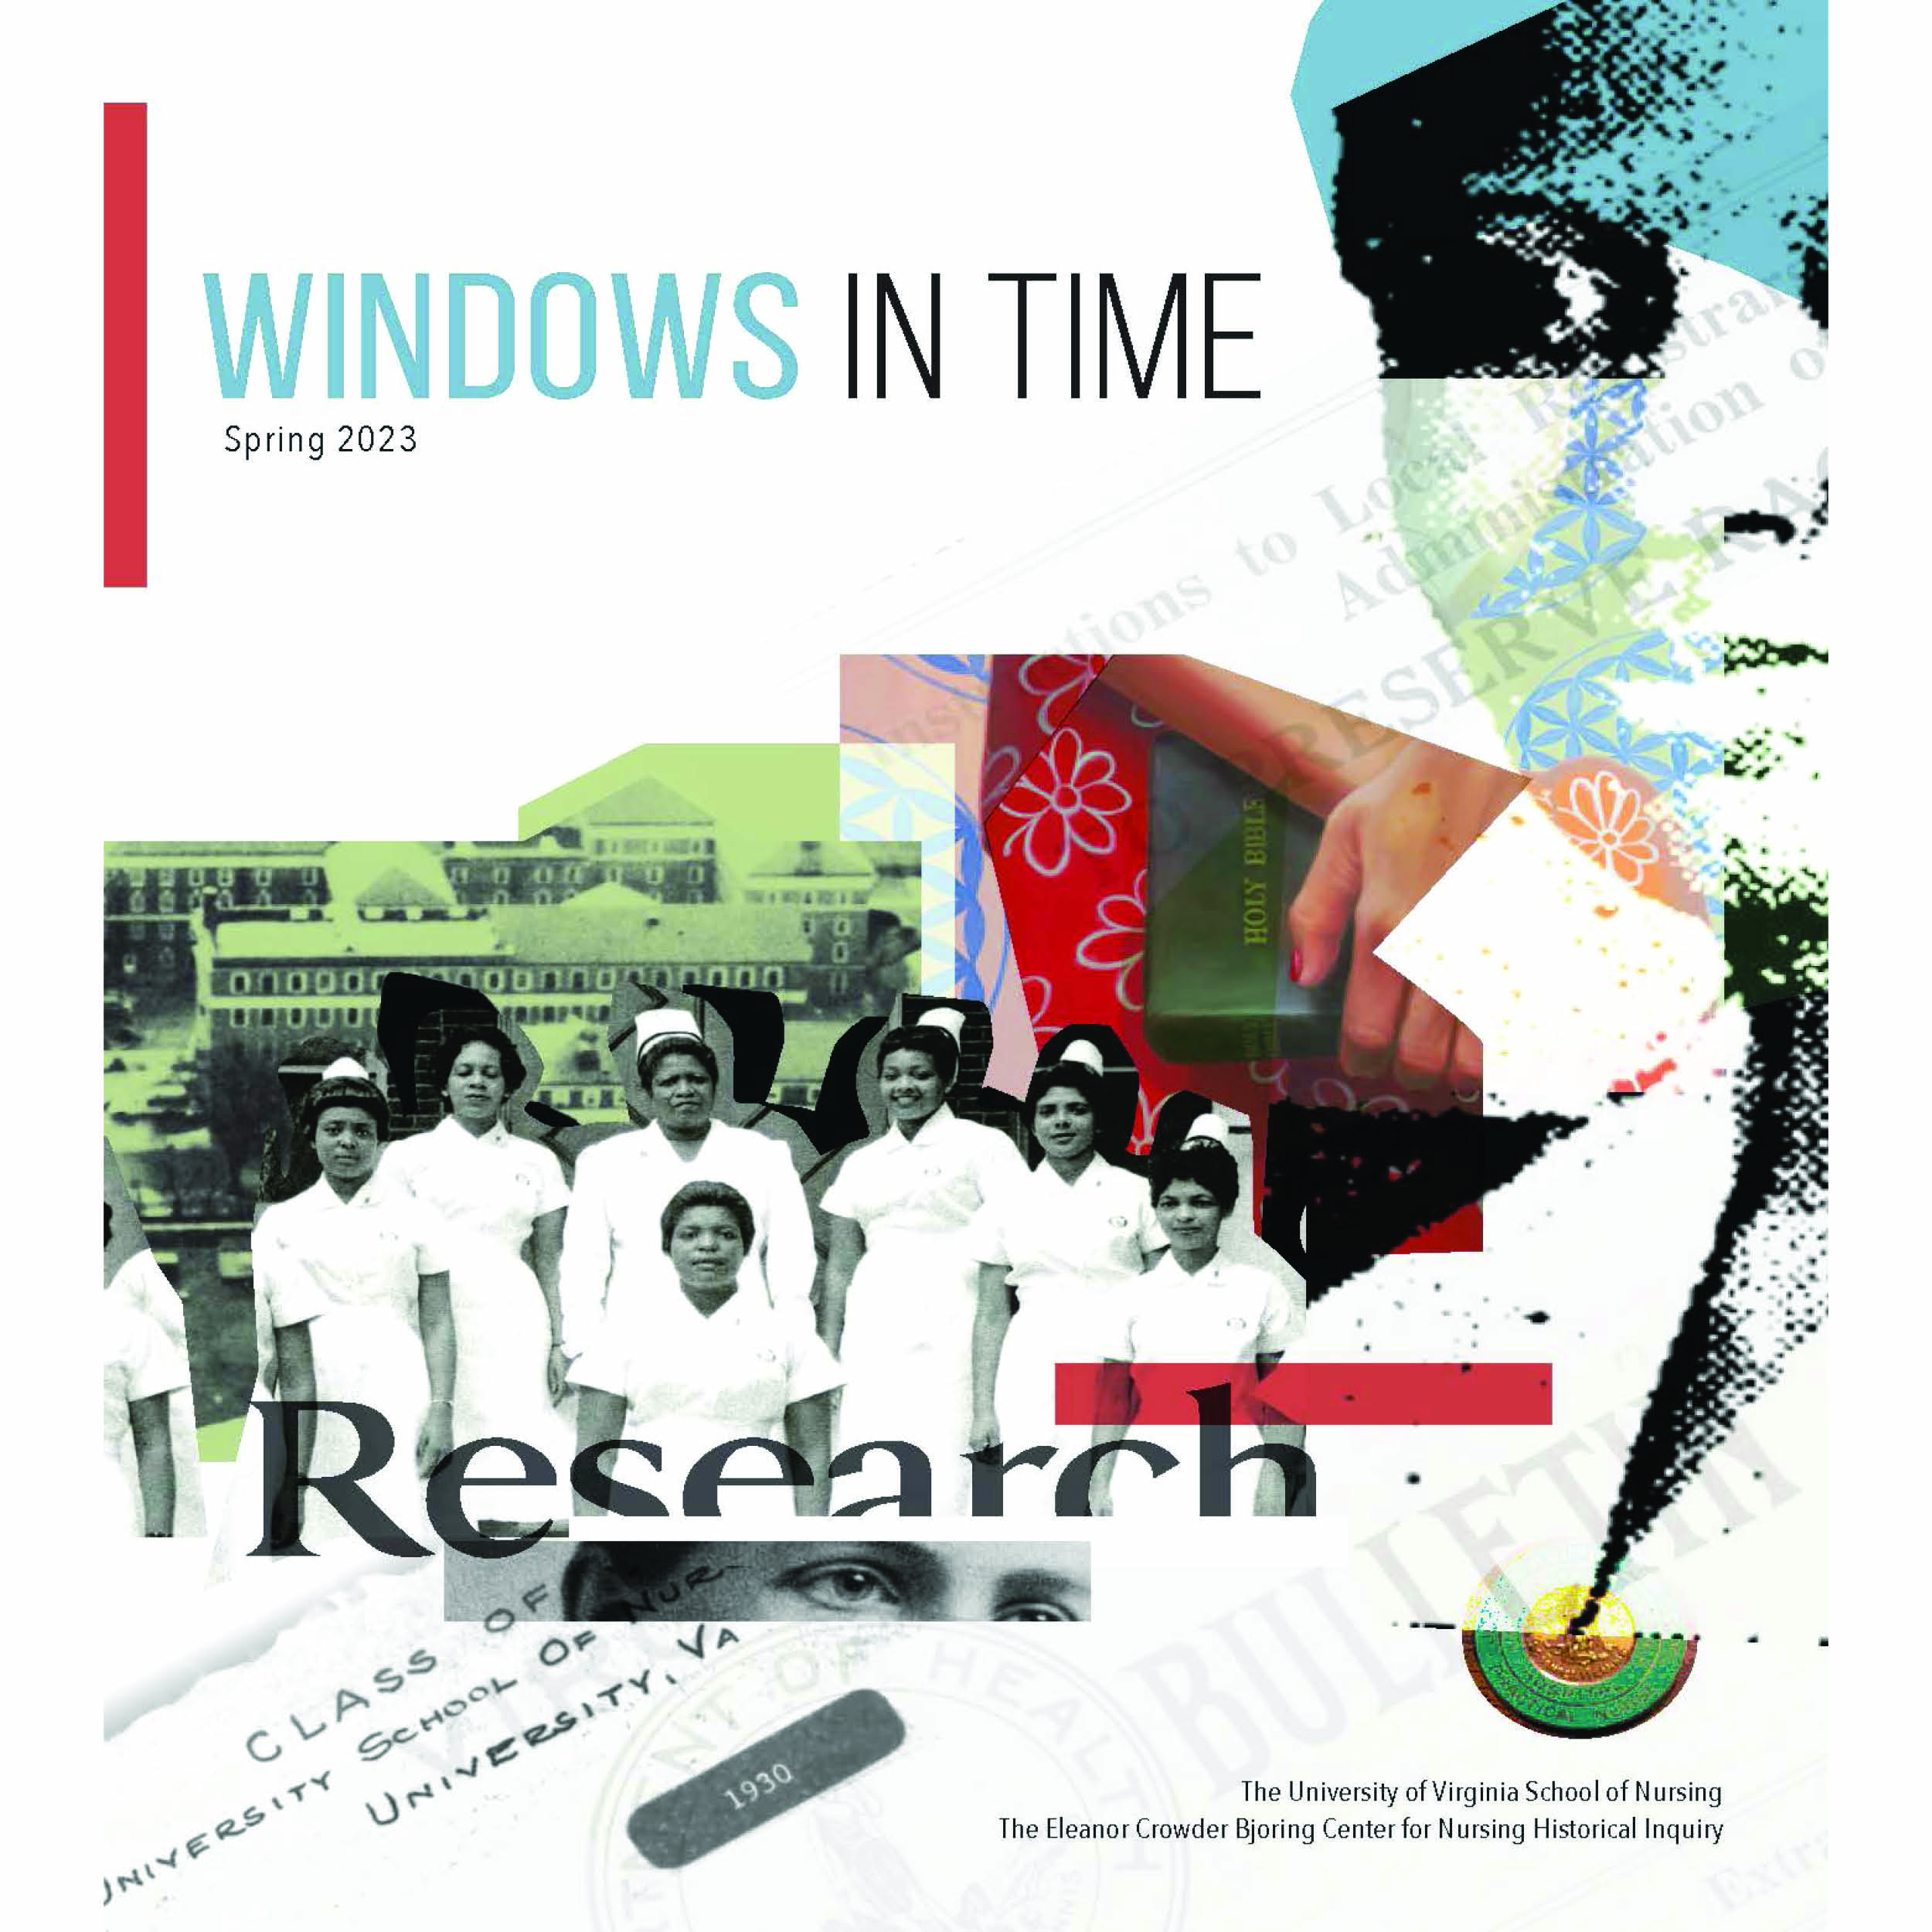 Student research in nursing history is the focus of the spring 2023 newsletter